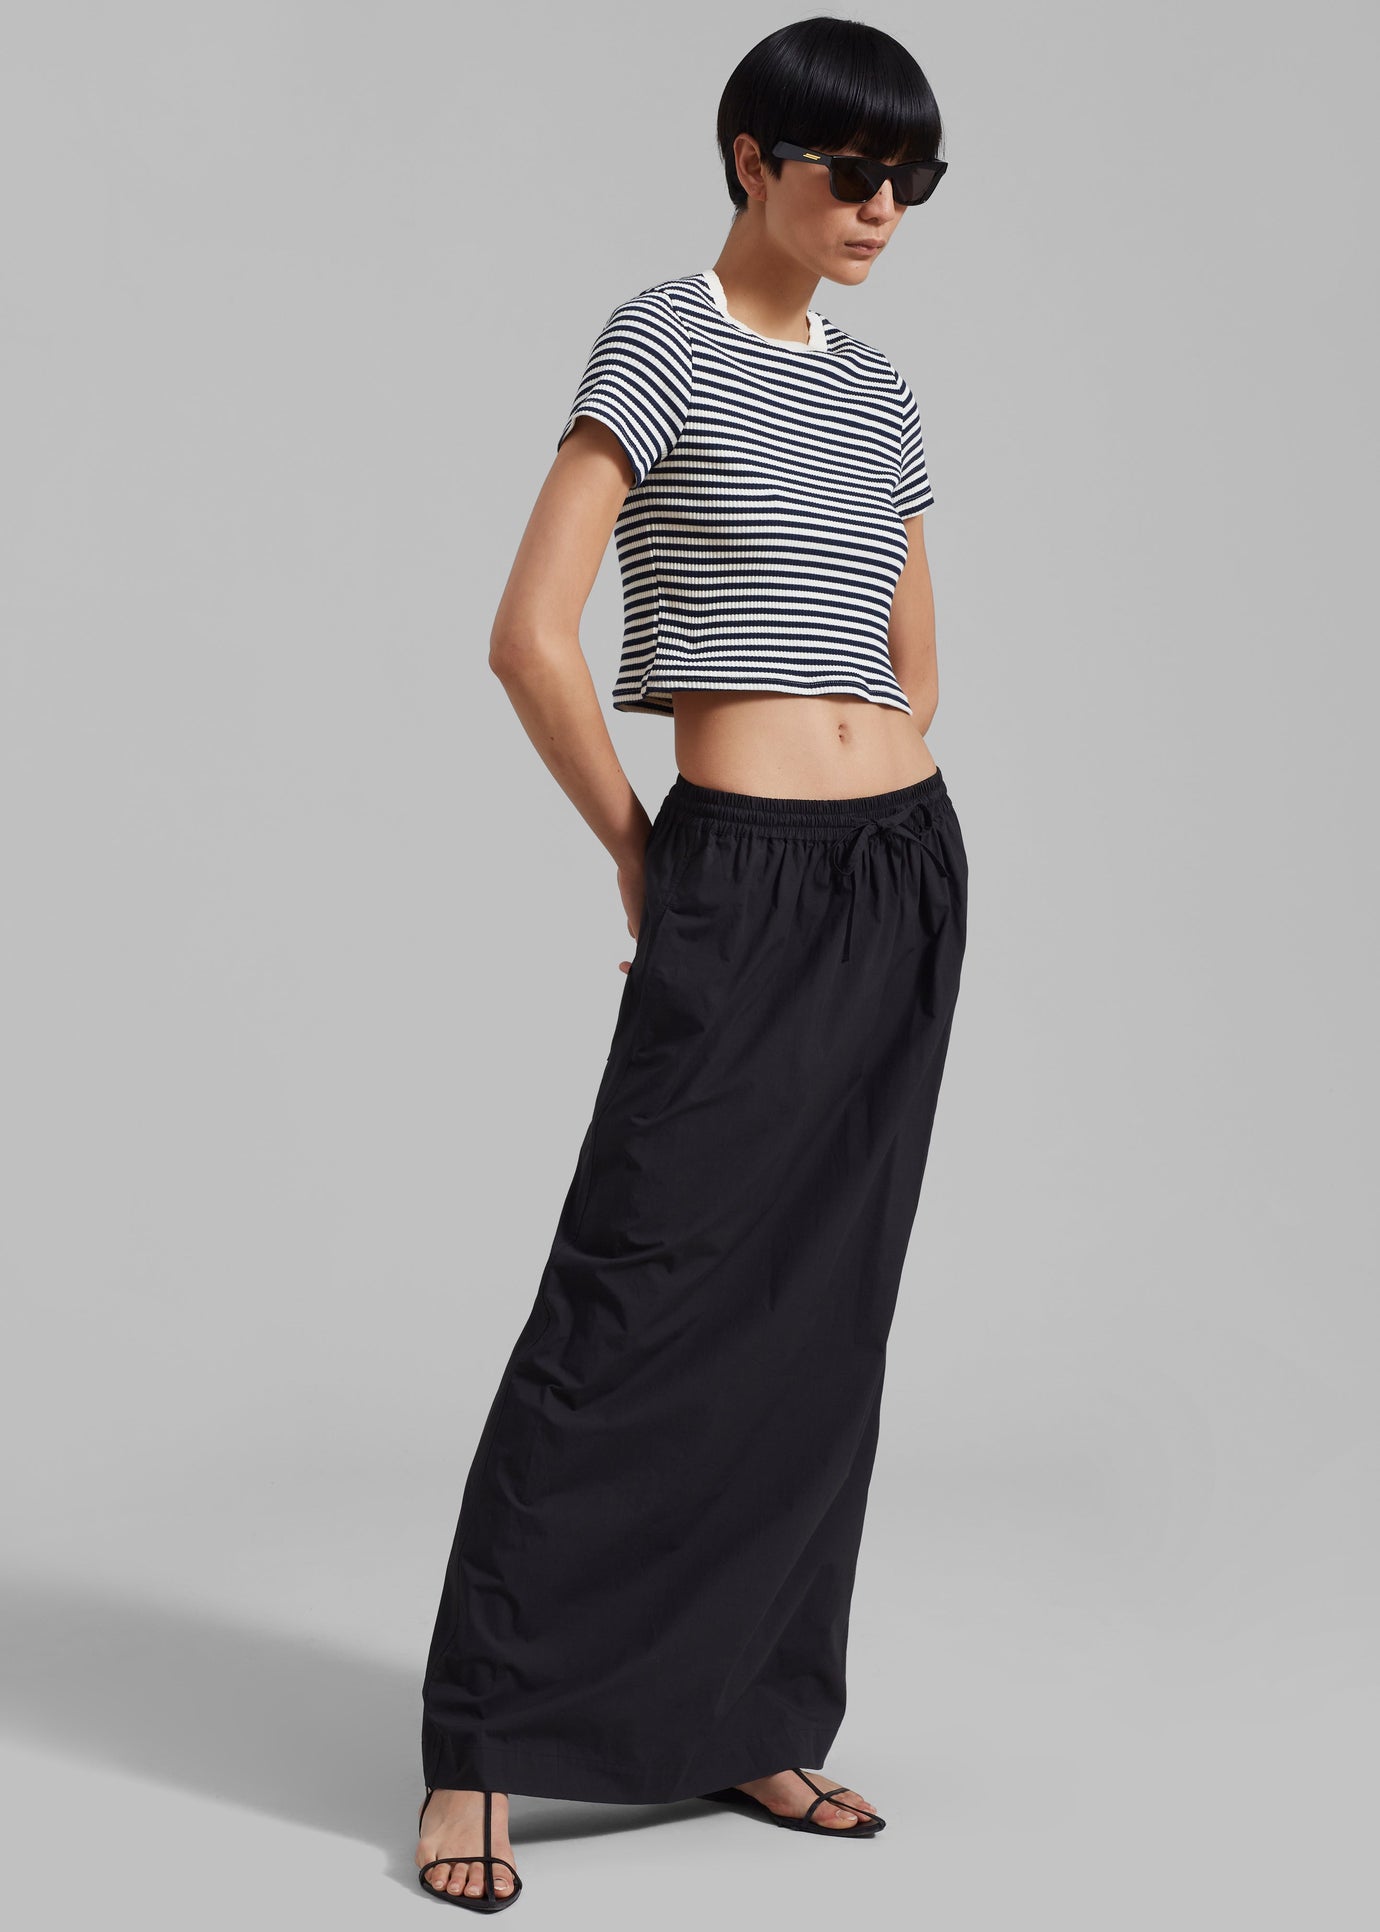 Matteau Relaxed Drawcord Skirt - Black